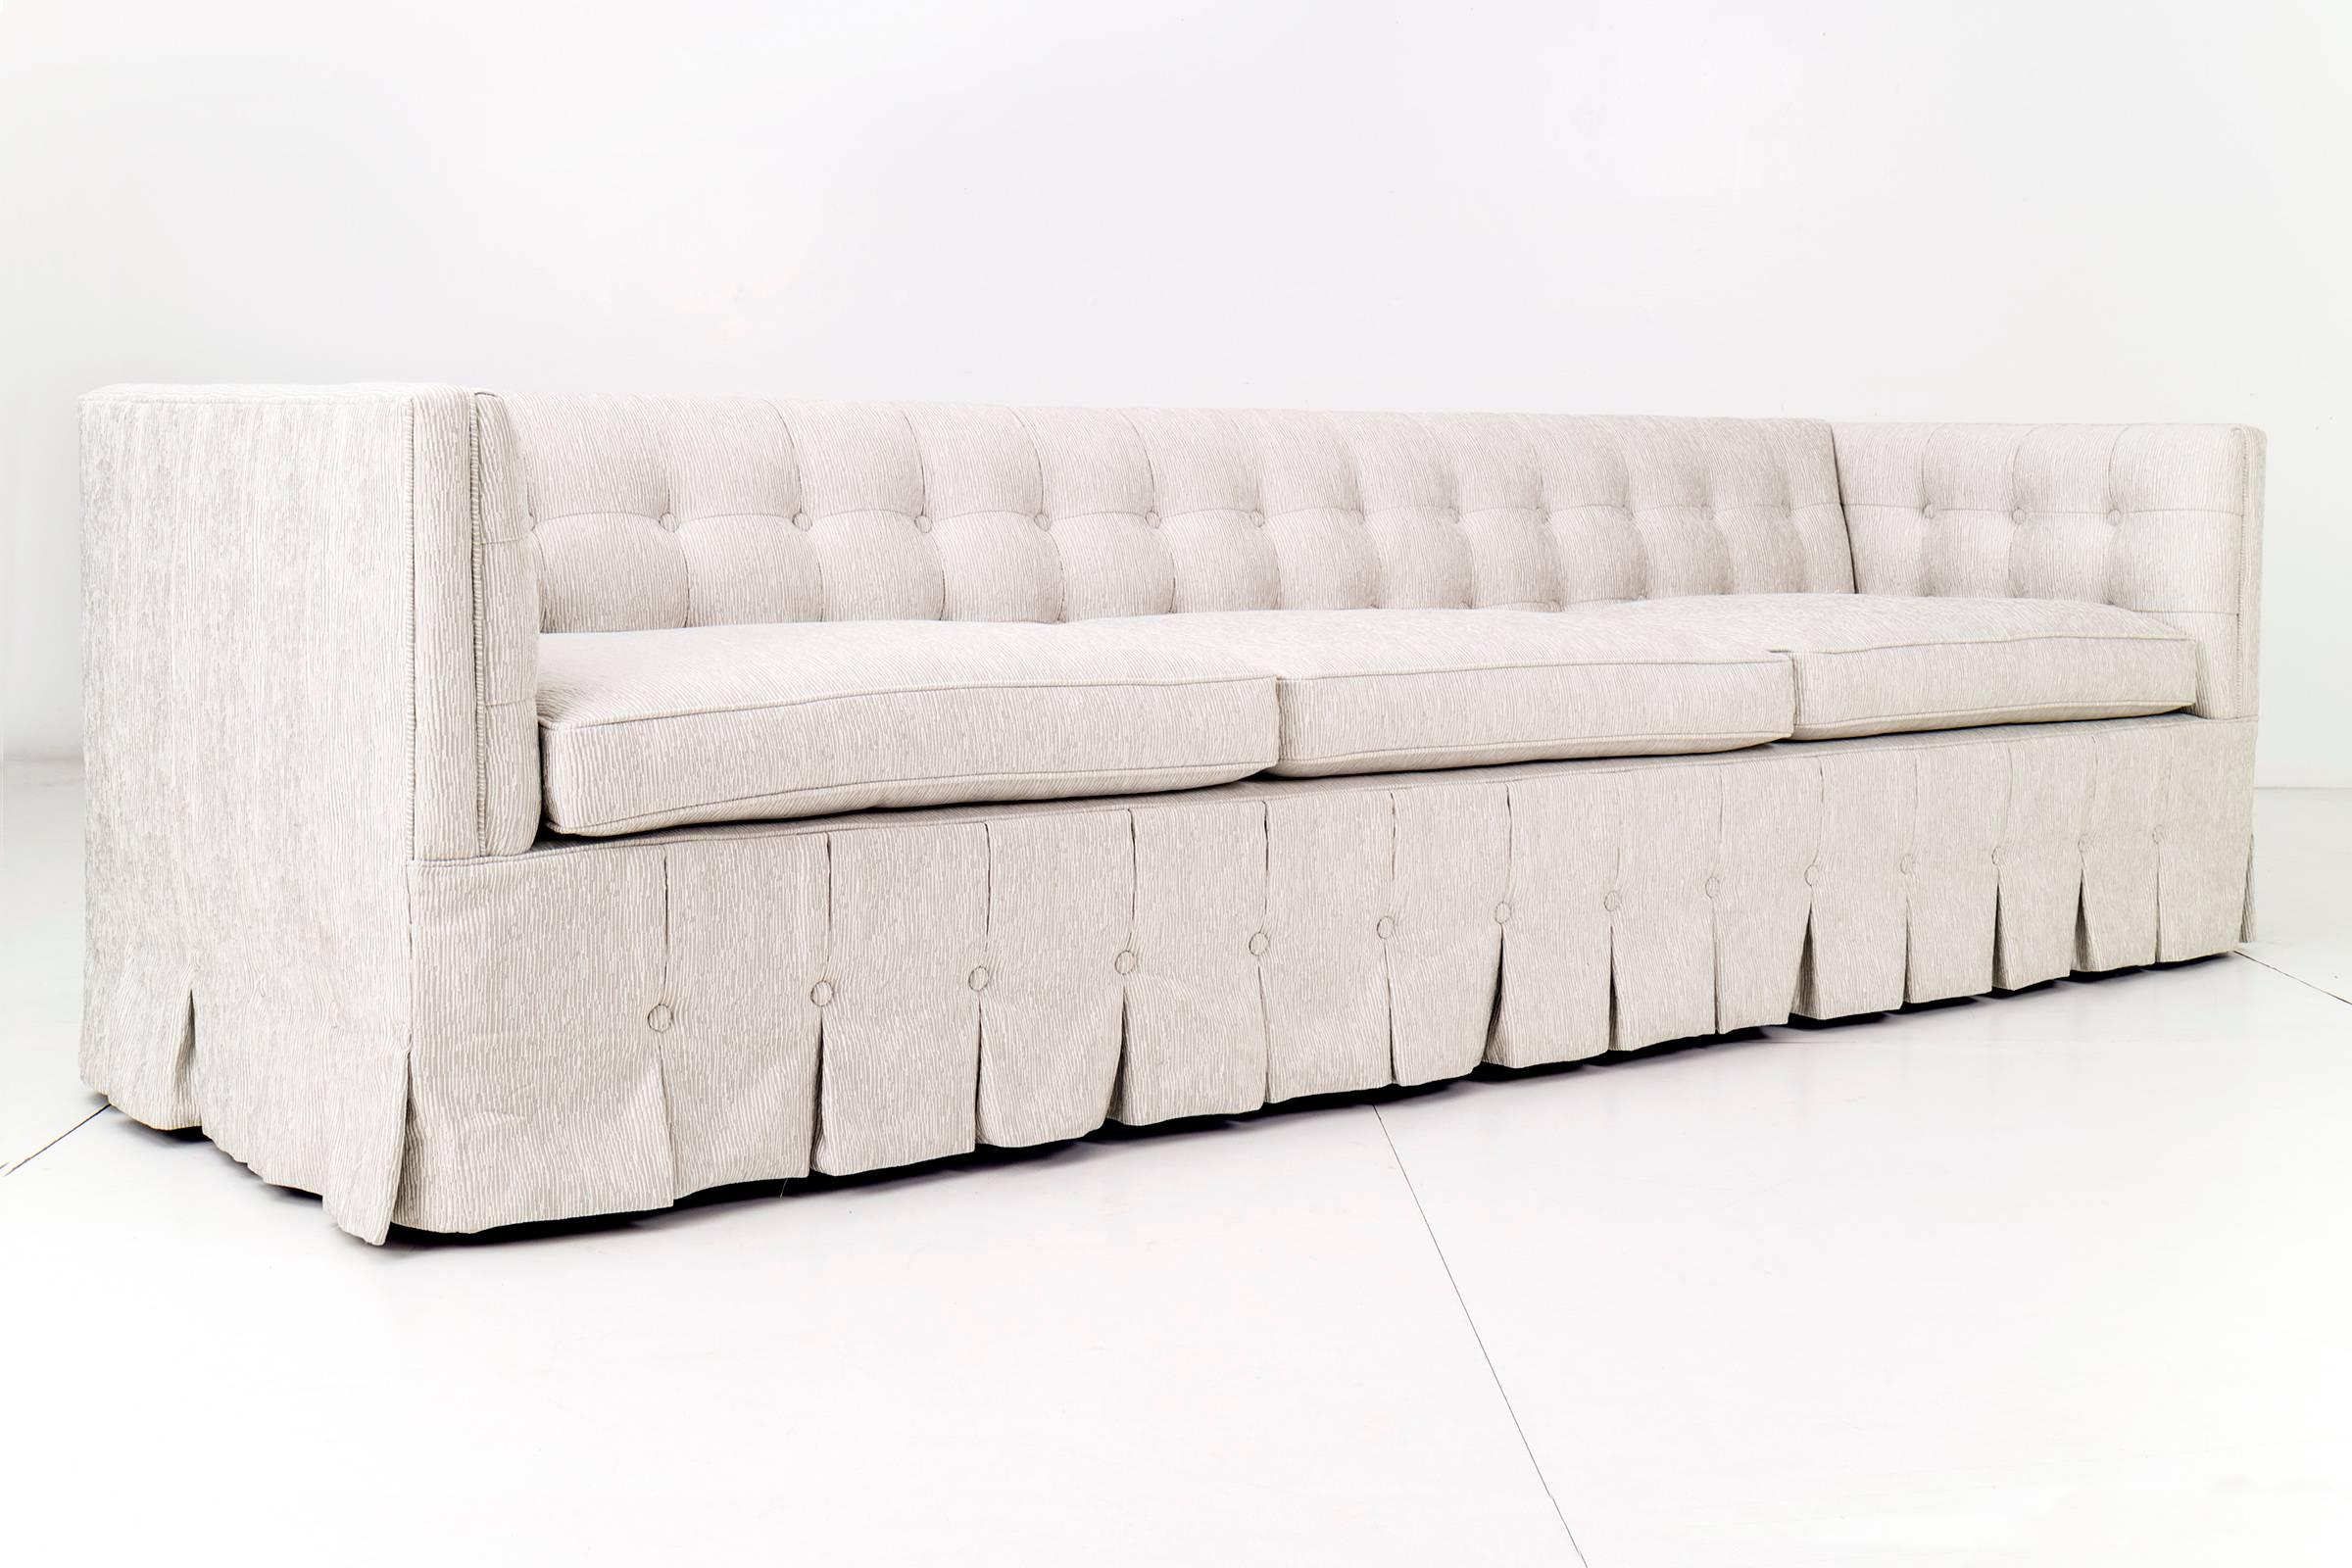 Adeline Stuckey for Kittinger modern, 7000 series biscuit-tufted back and arms Chesterfield sofa, with pleated skirt.
Reupholstered with great plains fabric.
       